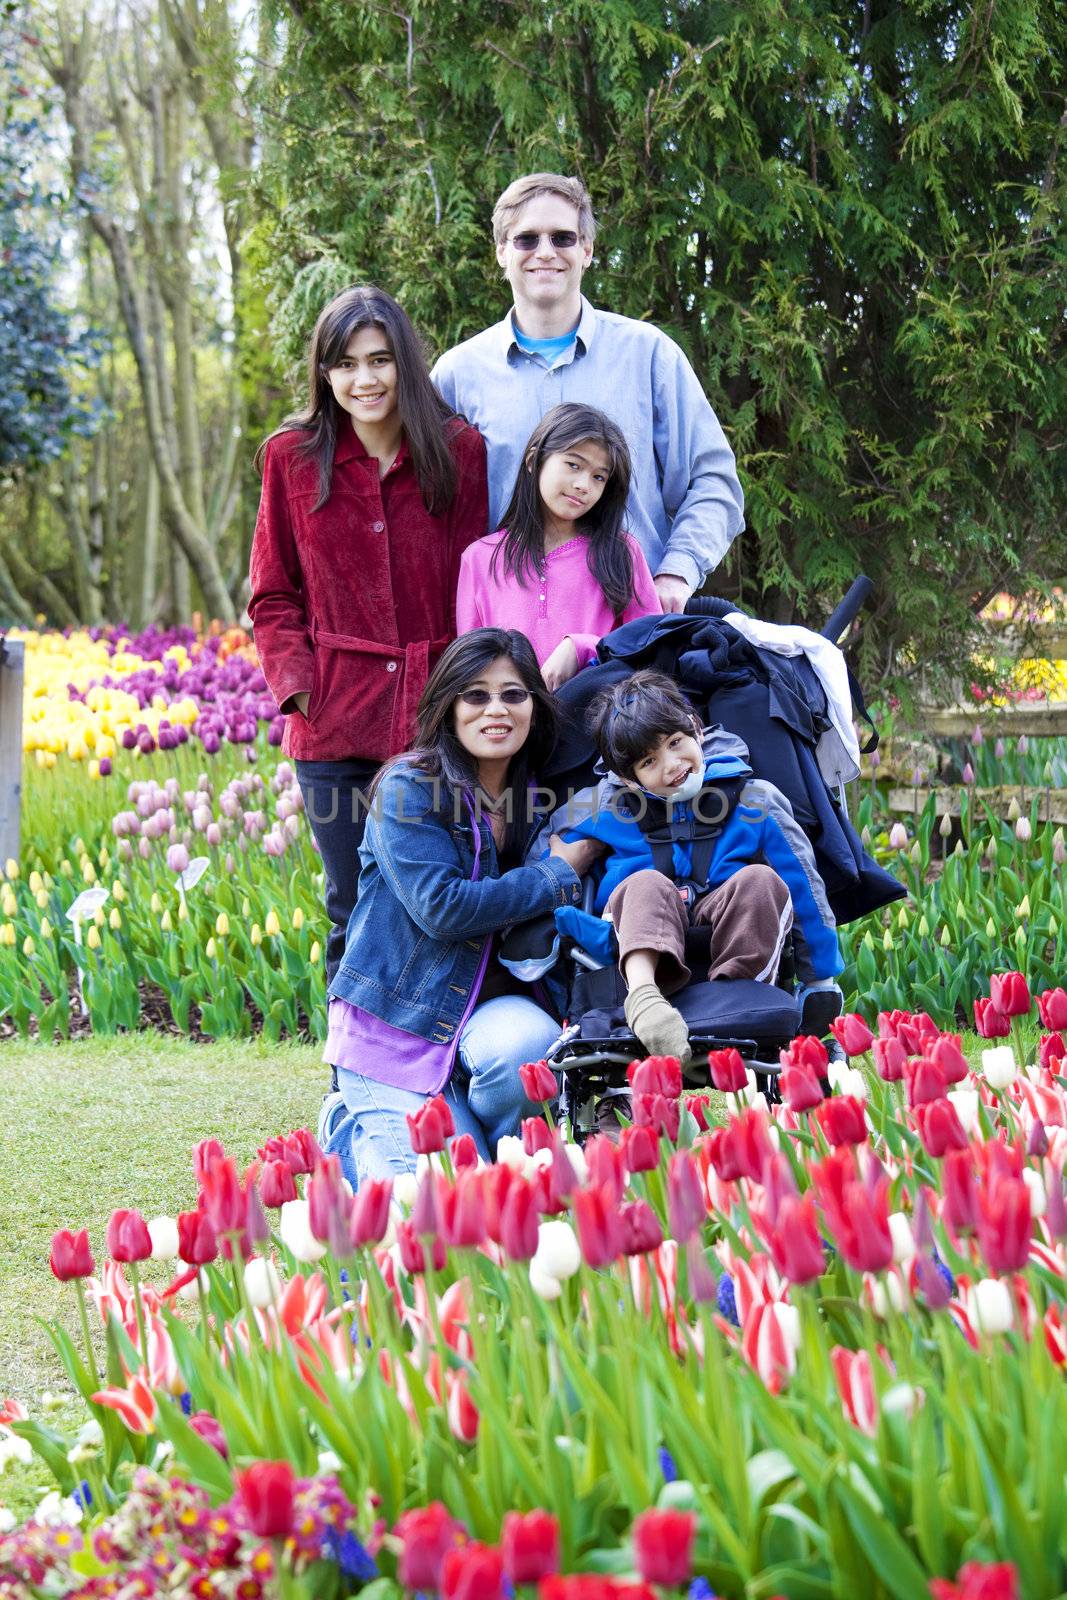 Family with disabled boy in the tulips gardens by jarenwicklund